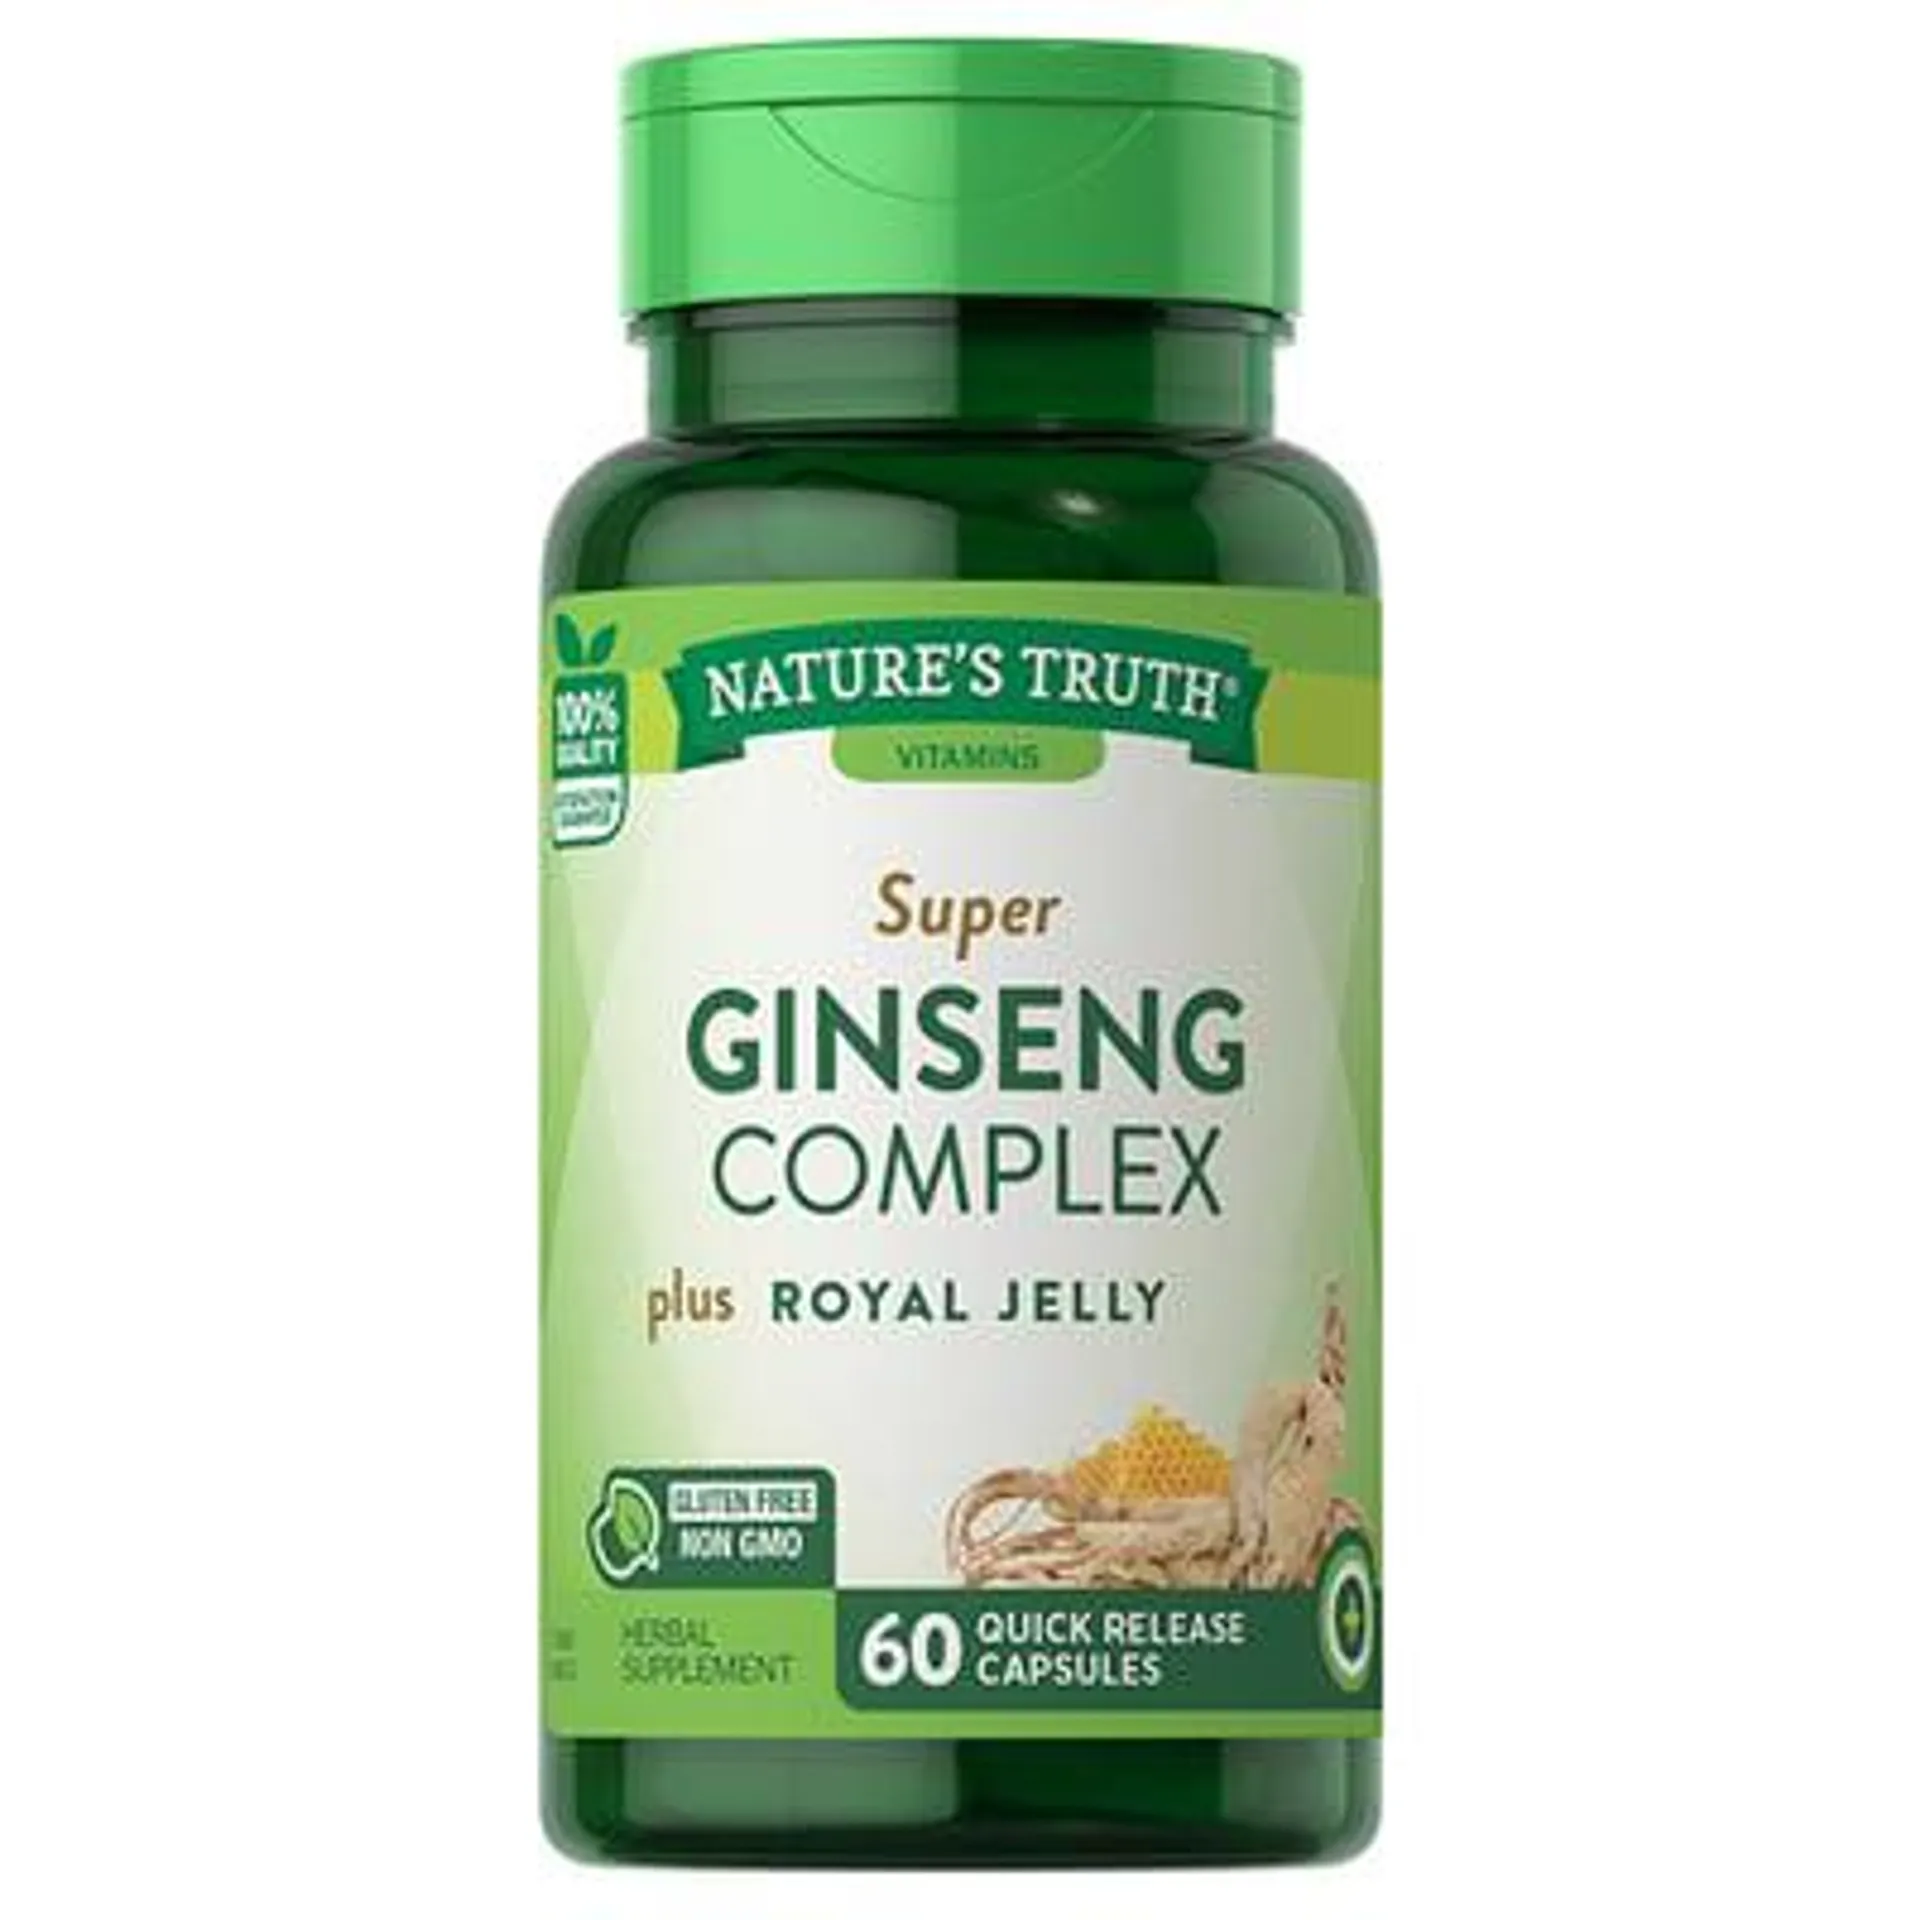 Natures Truth, Super Ginseng Complex, Plus Royal Jelly, Quick Release Capsules